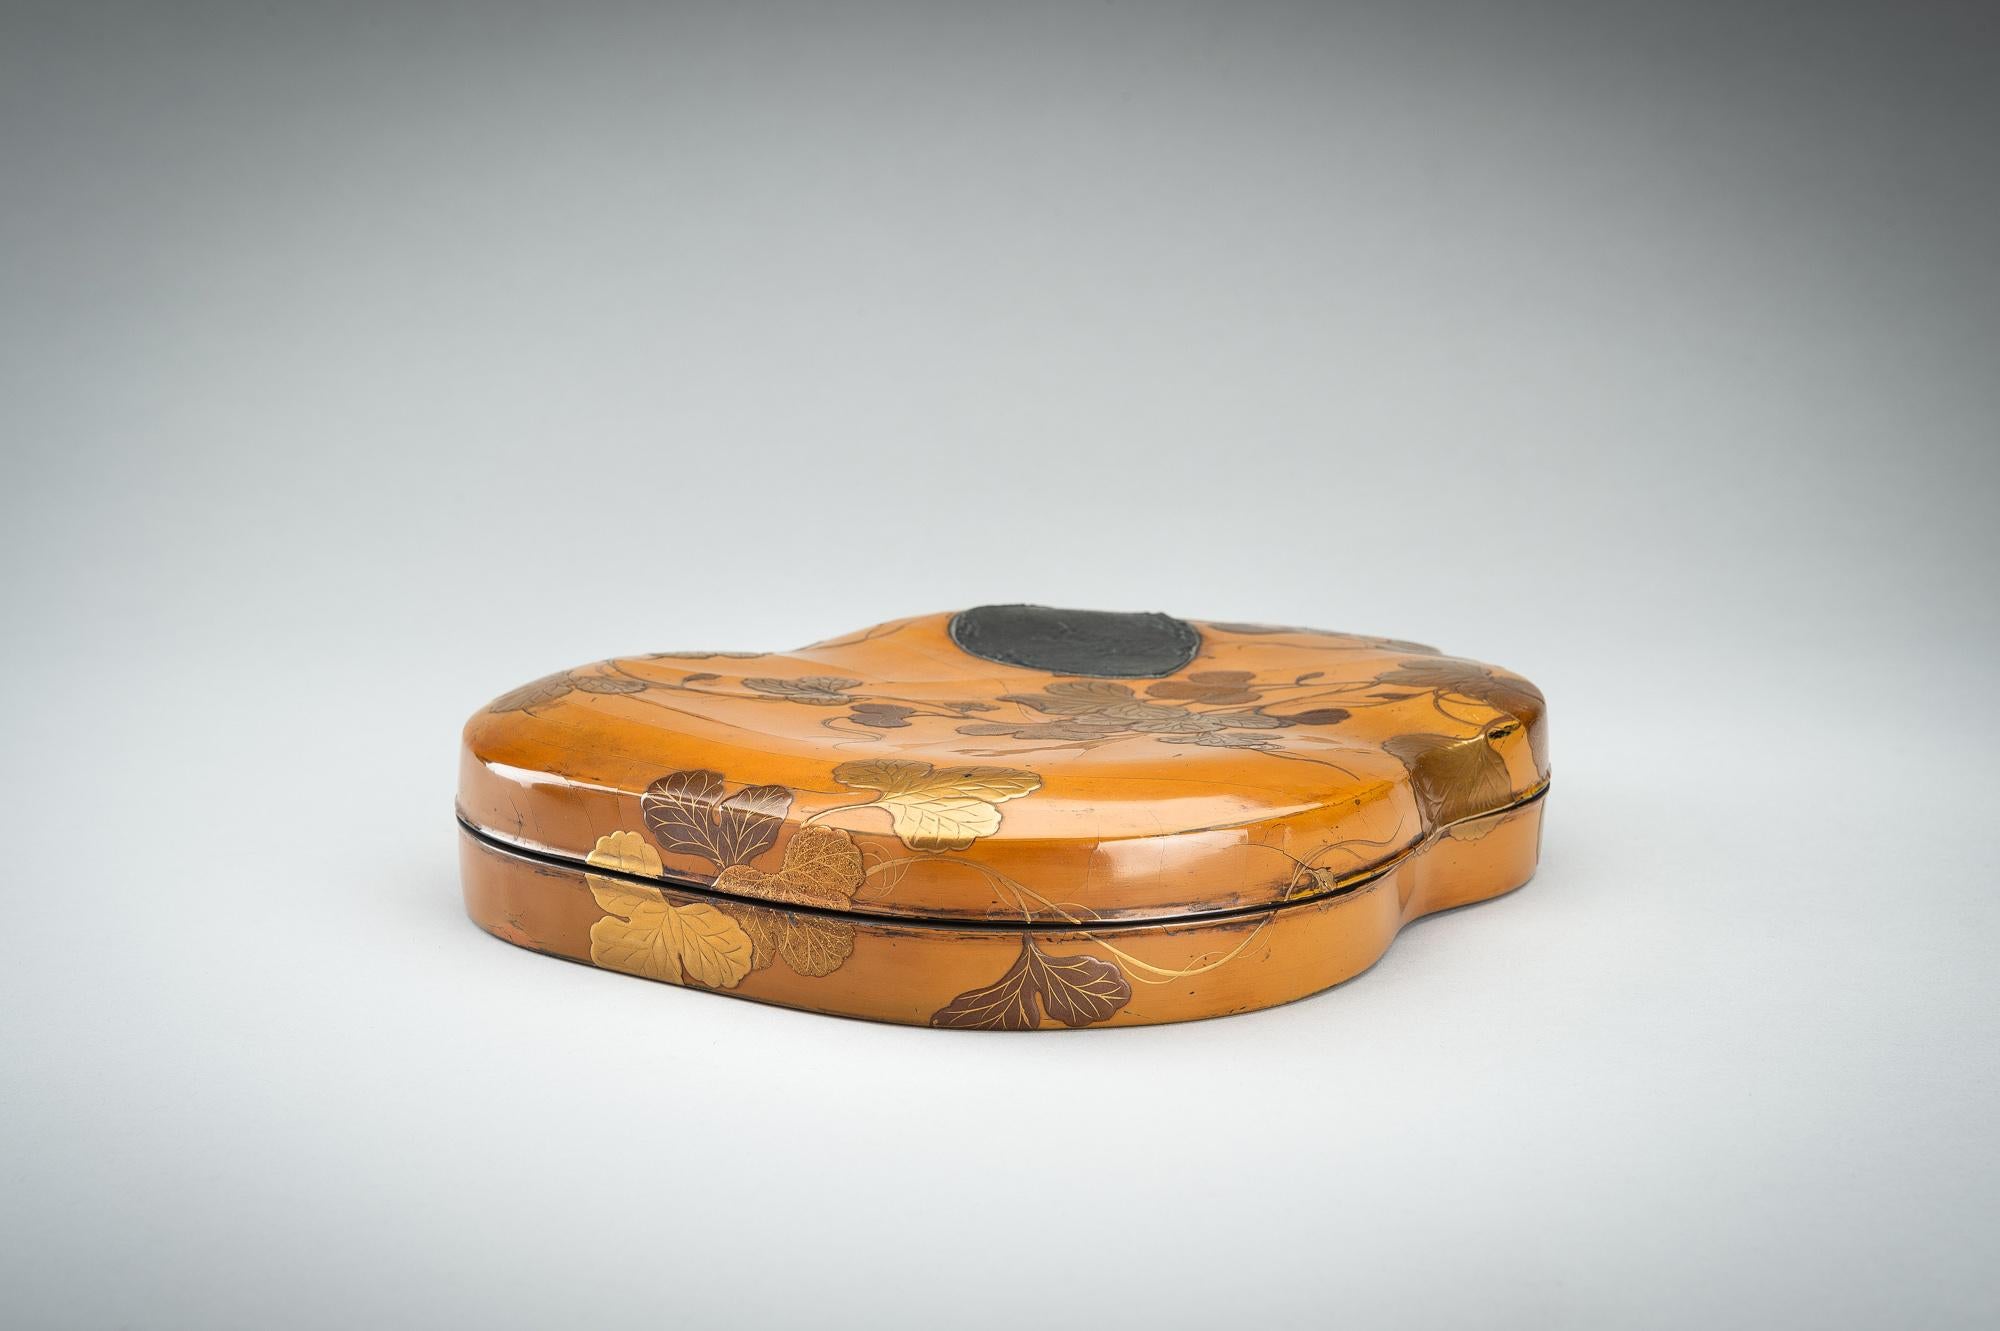 Hand-Crafted Japanese 'double gourd' lacquer suzuri’bako (writing box) by Hara Yôyûsai 原羊遊斎